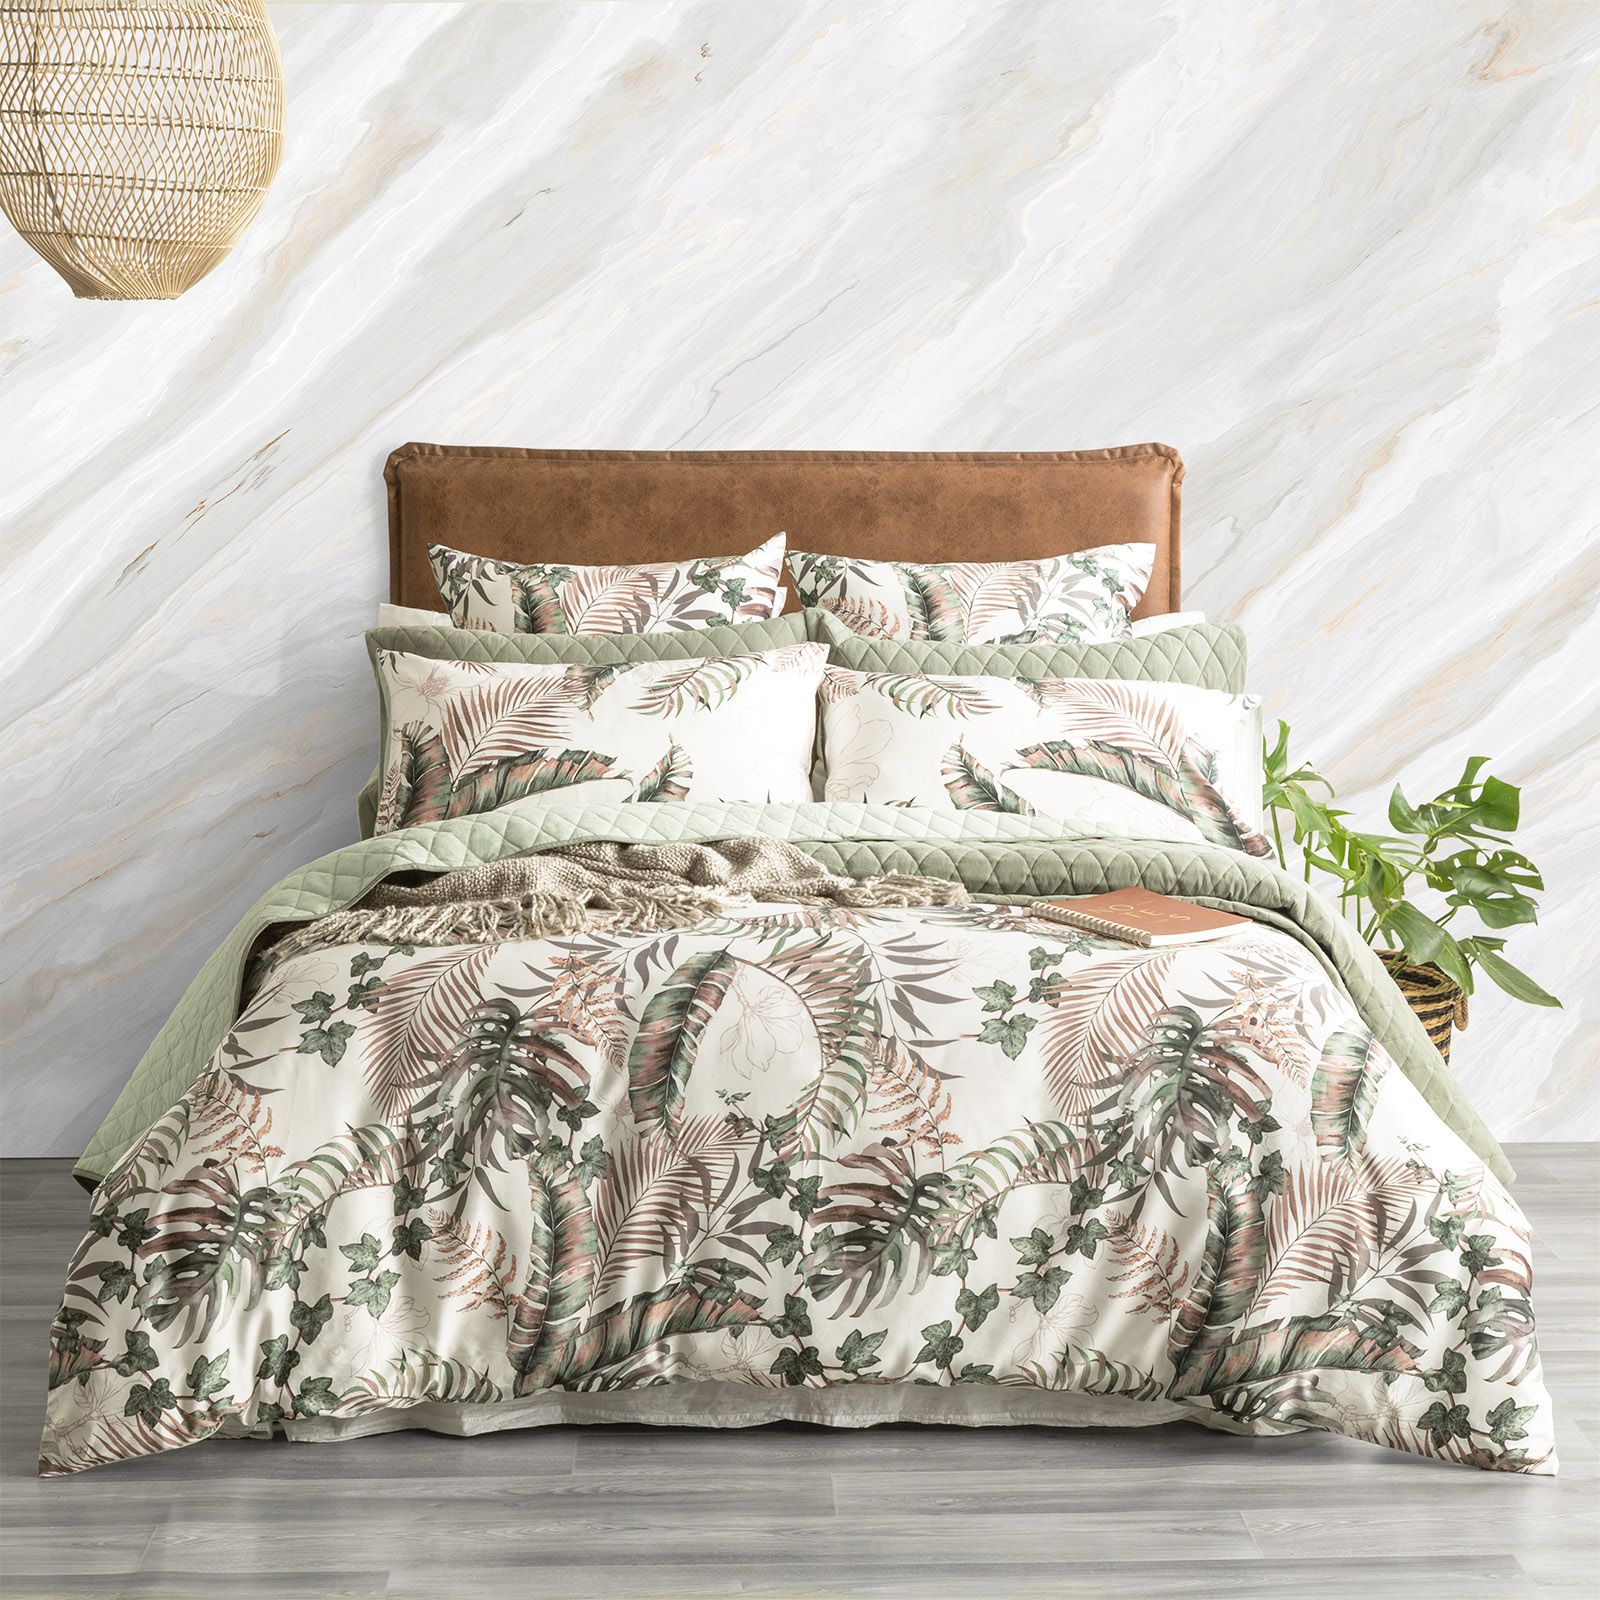 Renee Taylor Palm Cove Pearl Quilt Cover Set - Finnys Manchester